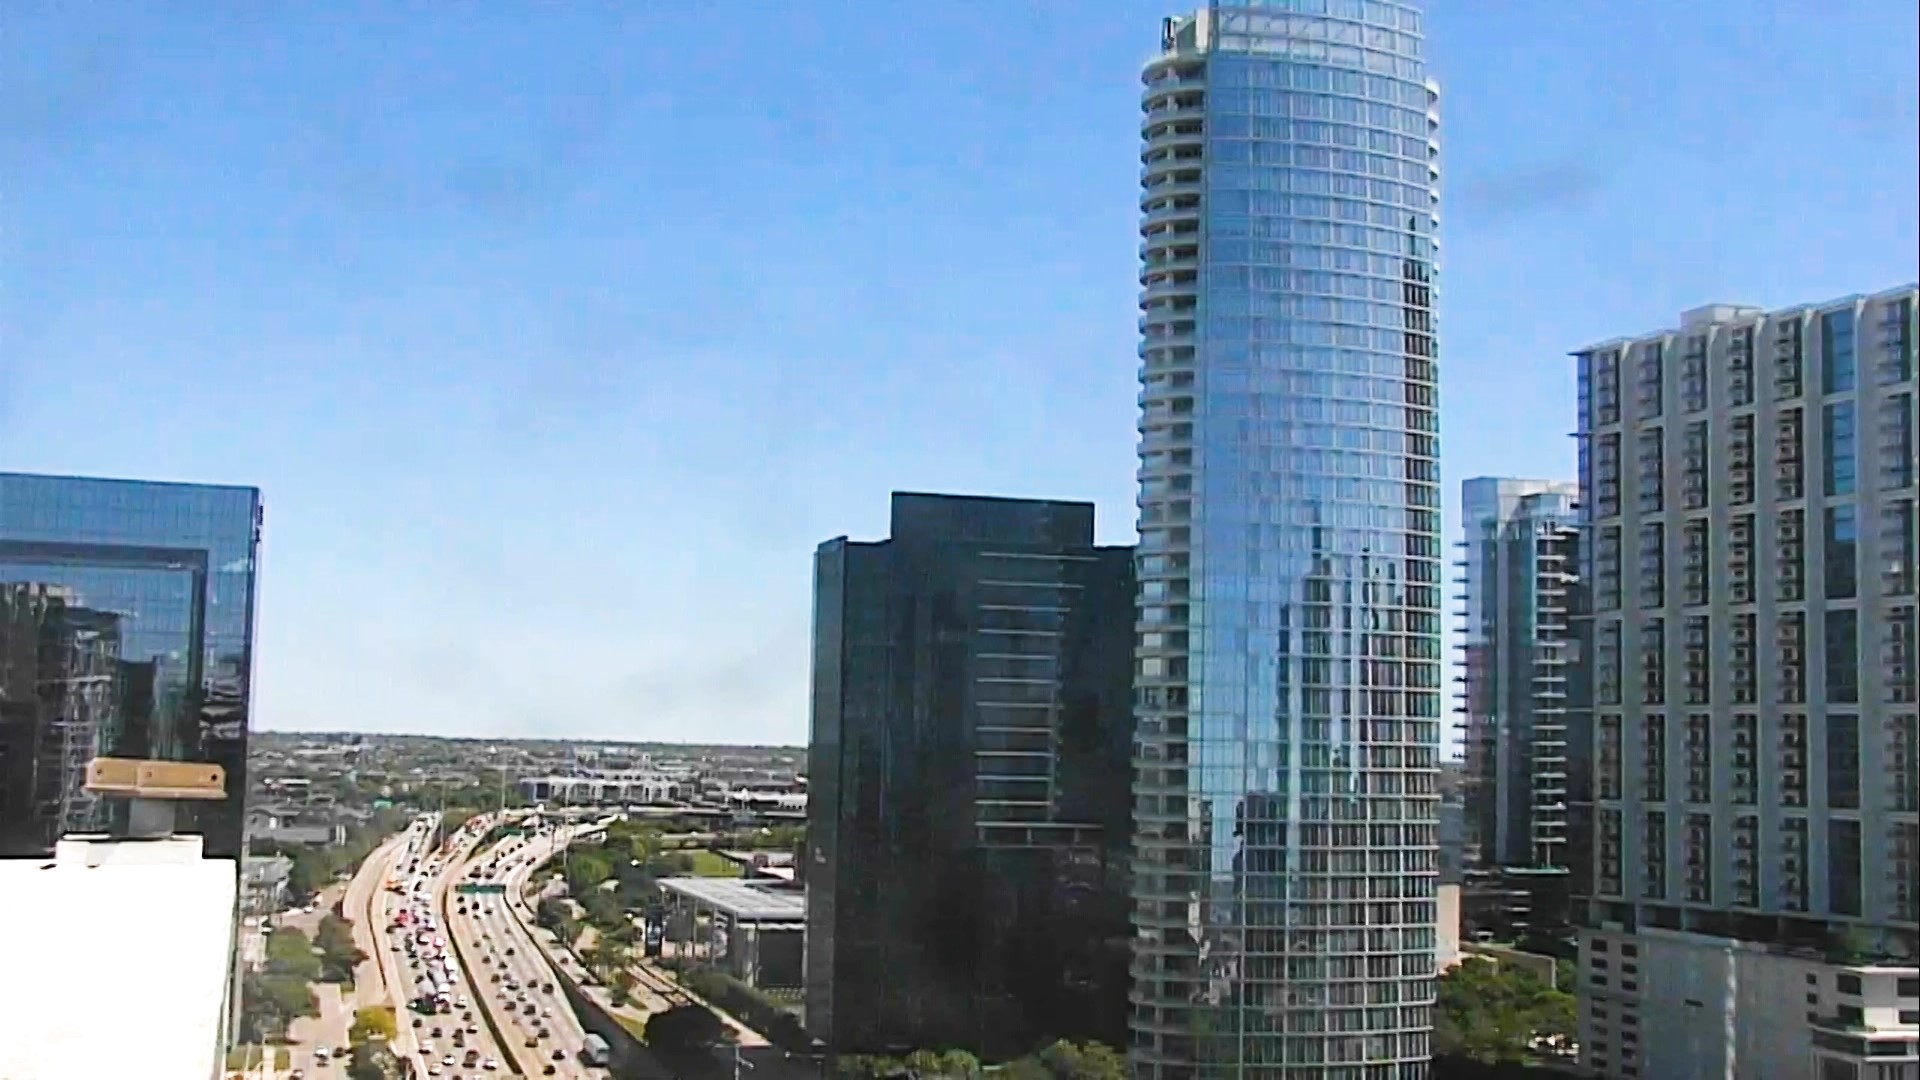 Take a look at a time-lapse of traffic going by in Dallas on April 3, 2024.